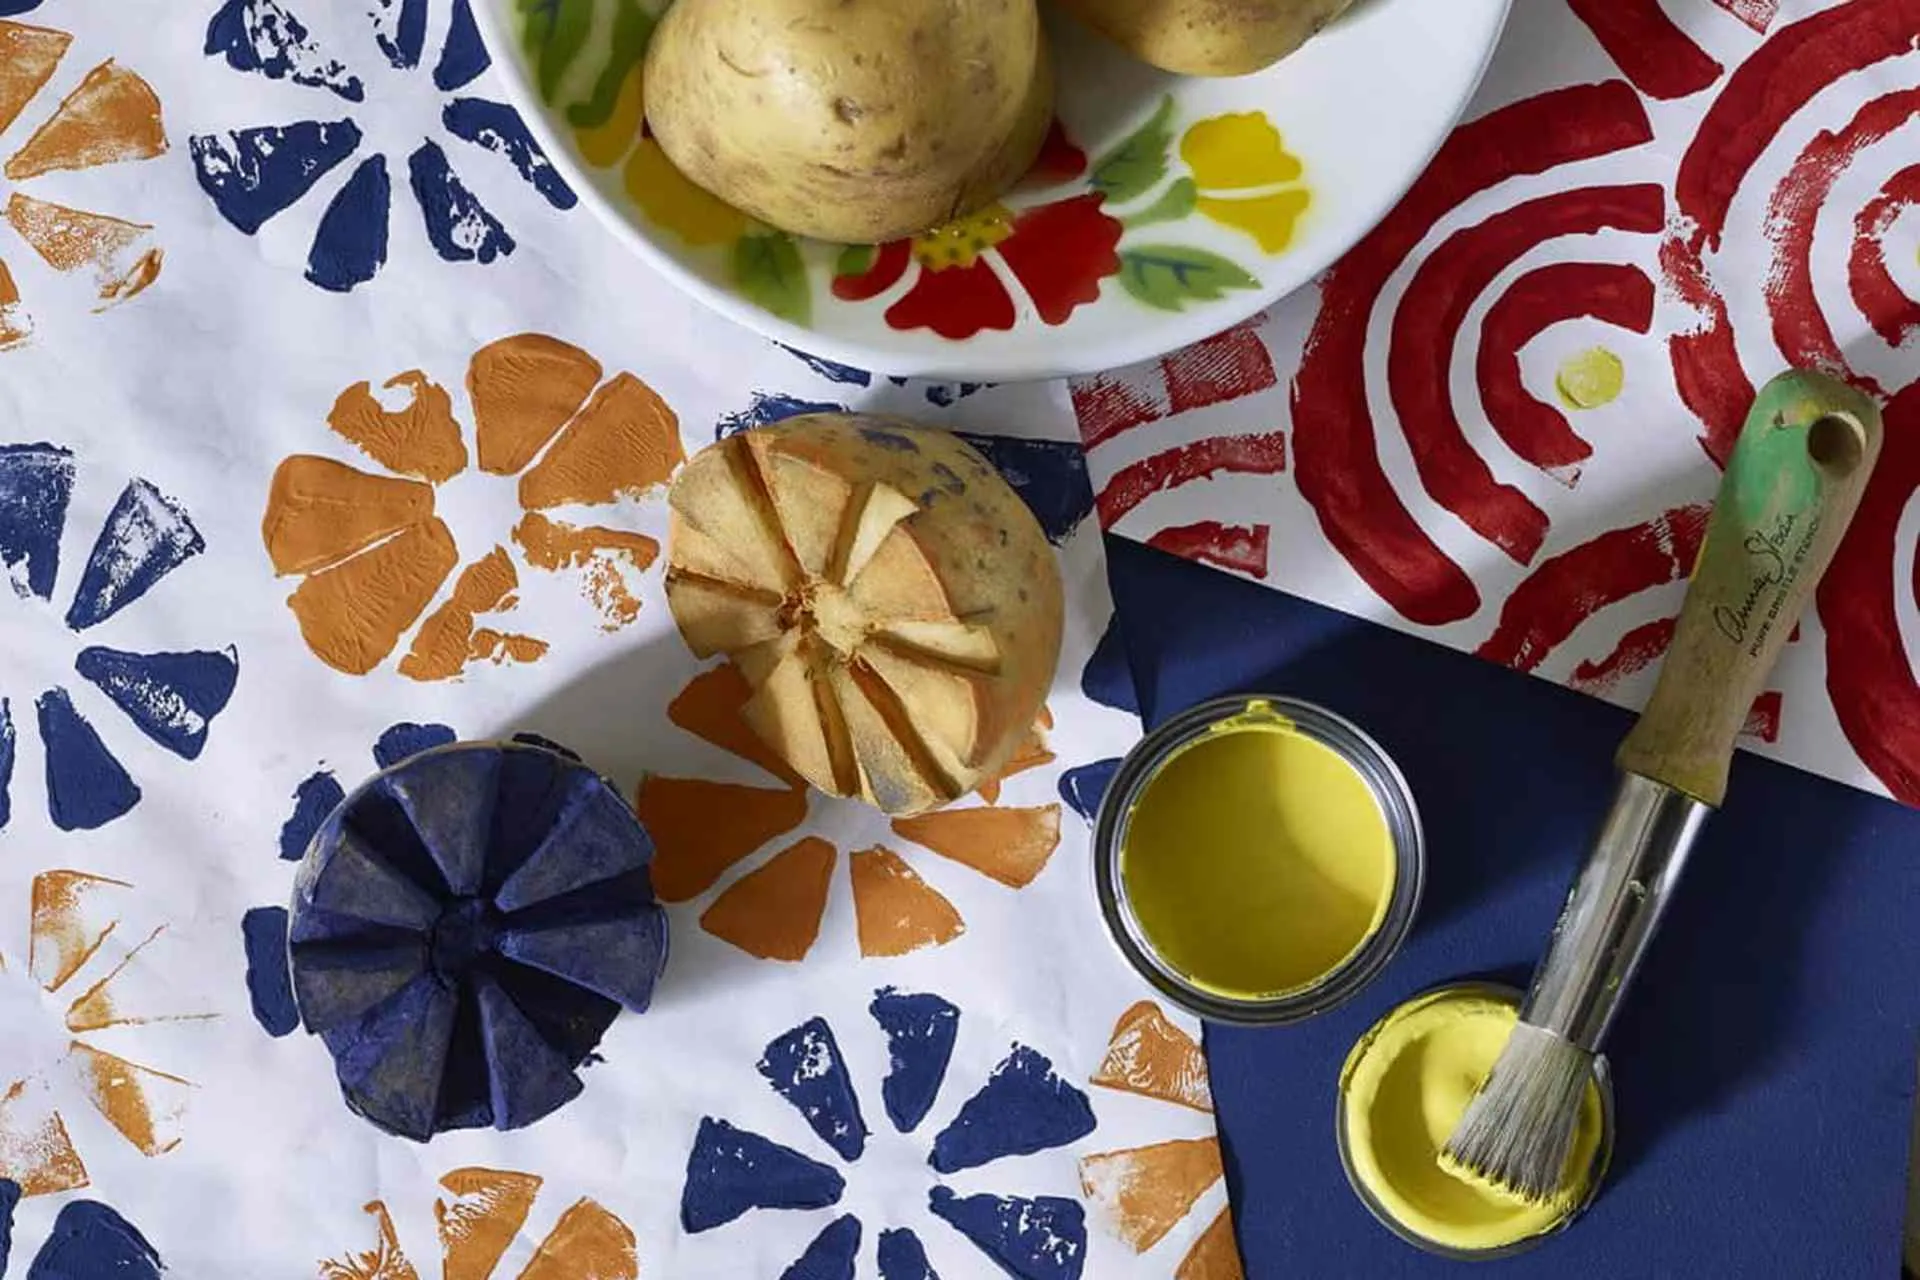 Block Printing with Fruits and Vegetables